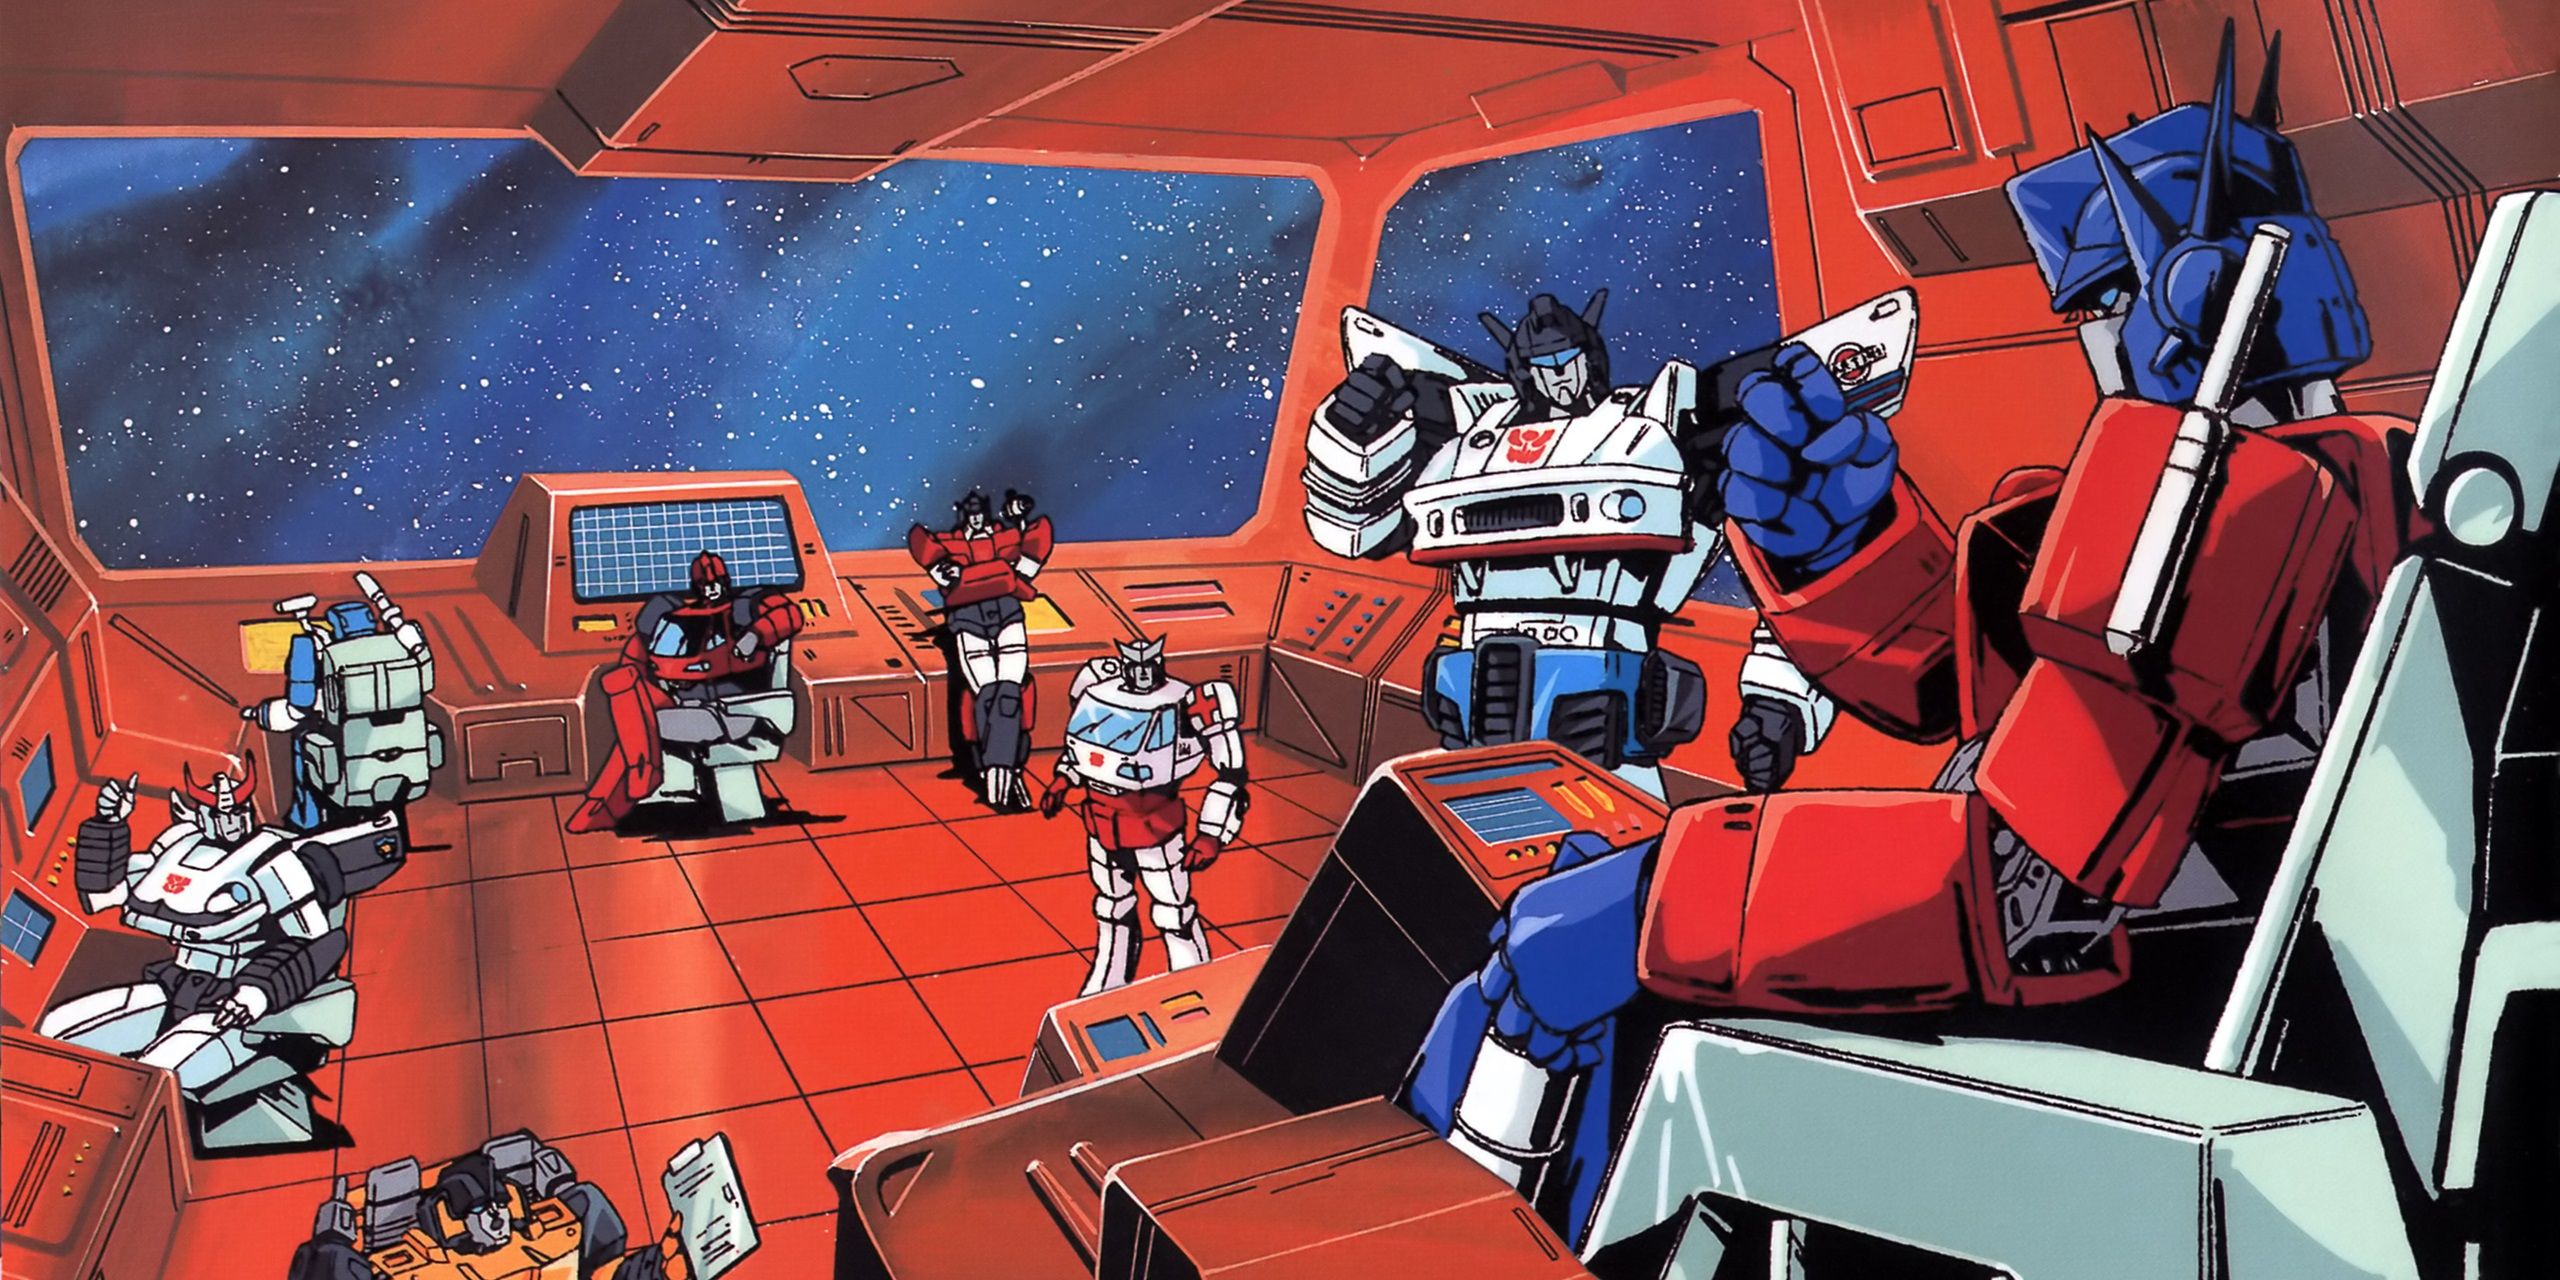 Optimus Prime with Jazz and other Autobots